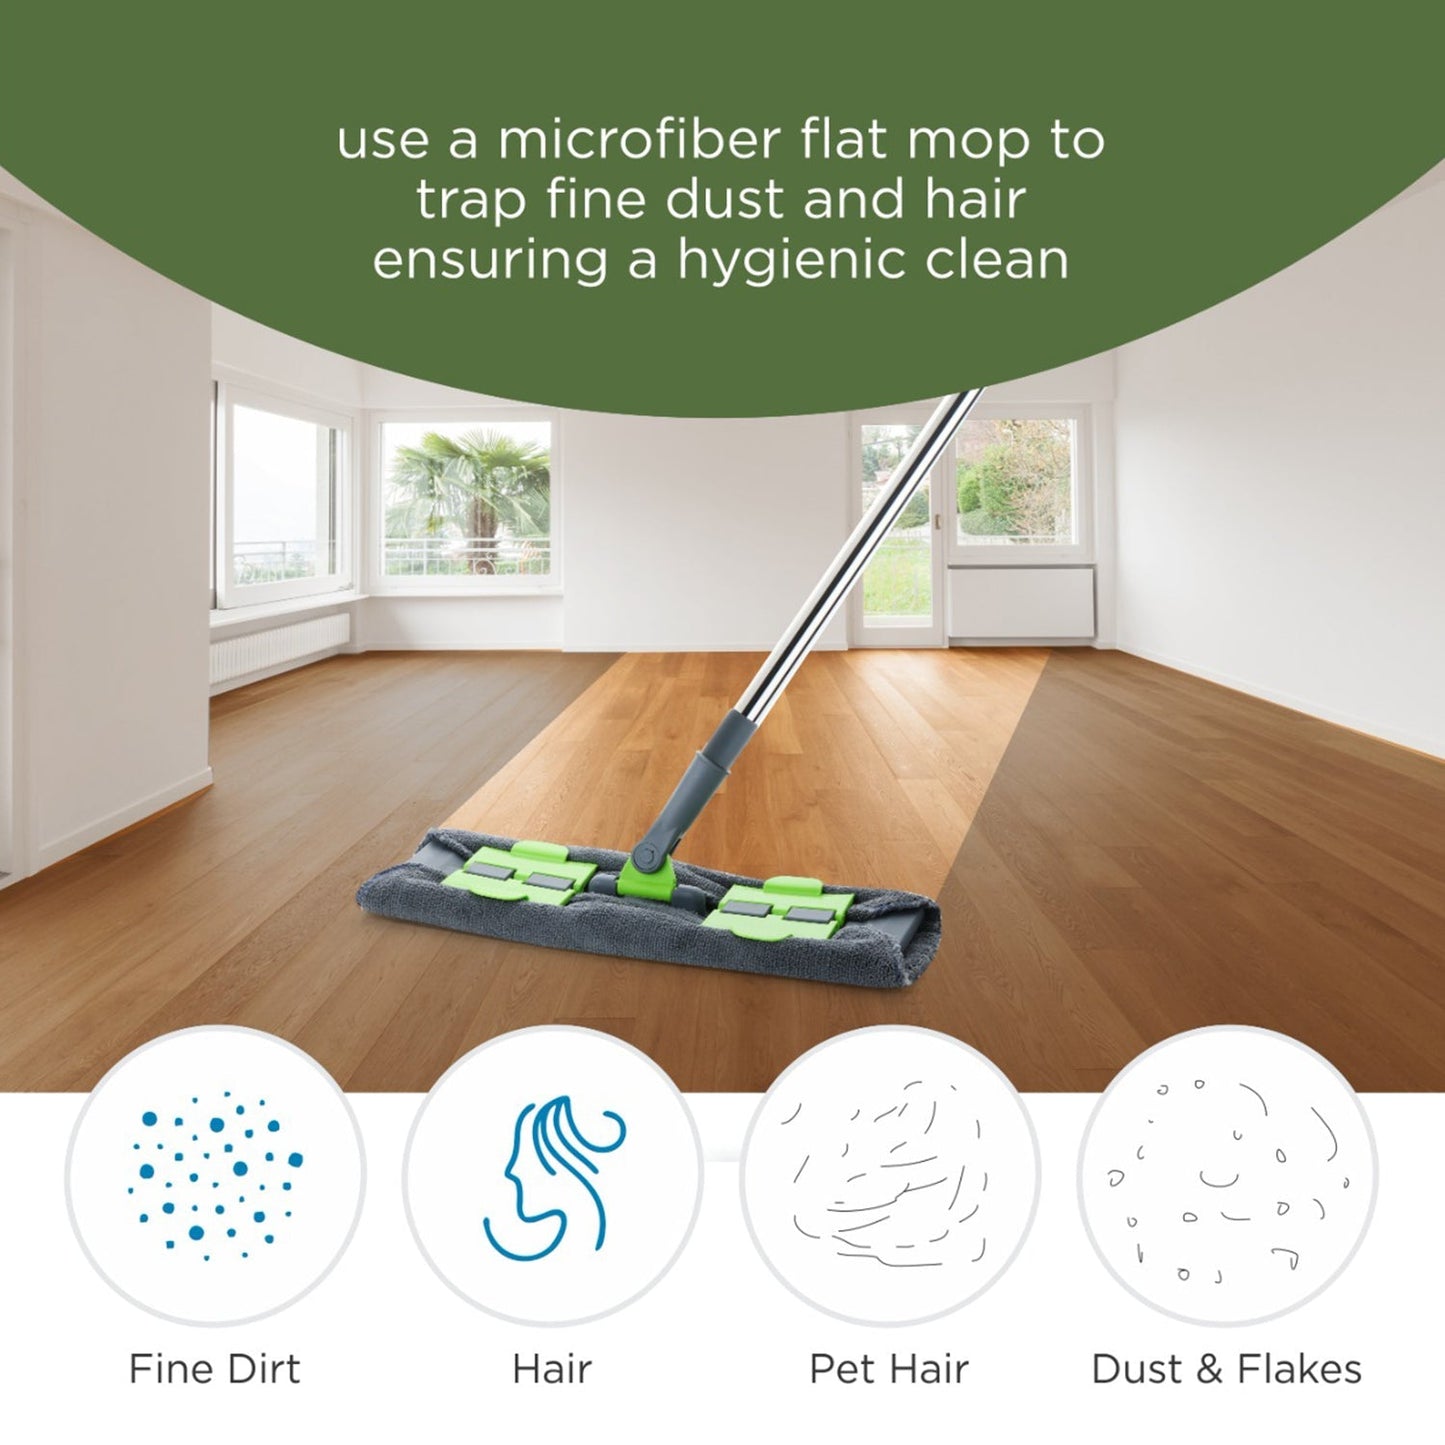 Wet and Dry Cleaning Microfiber Flat Floor Cleaning Mop